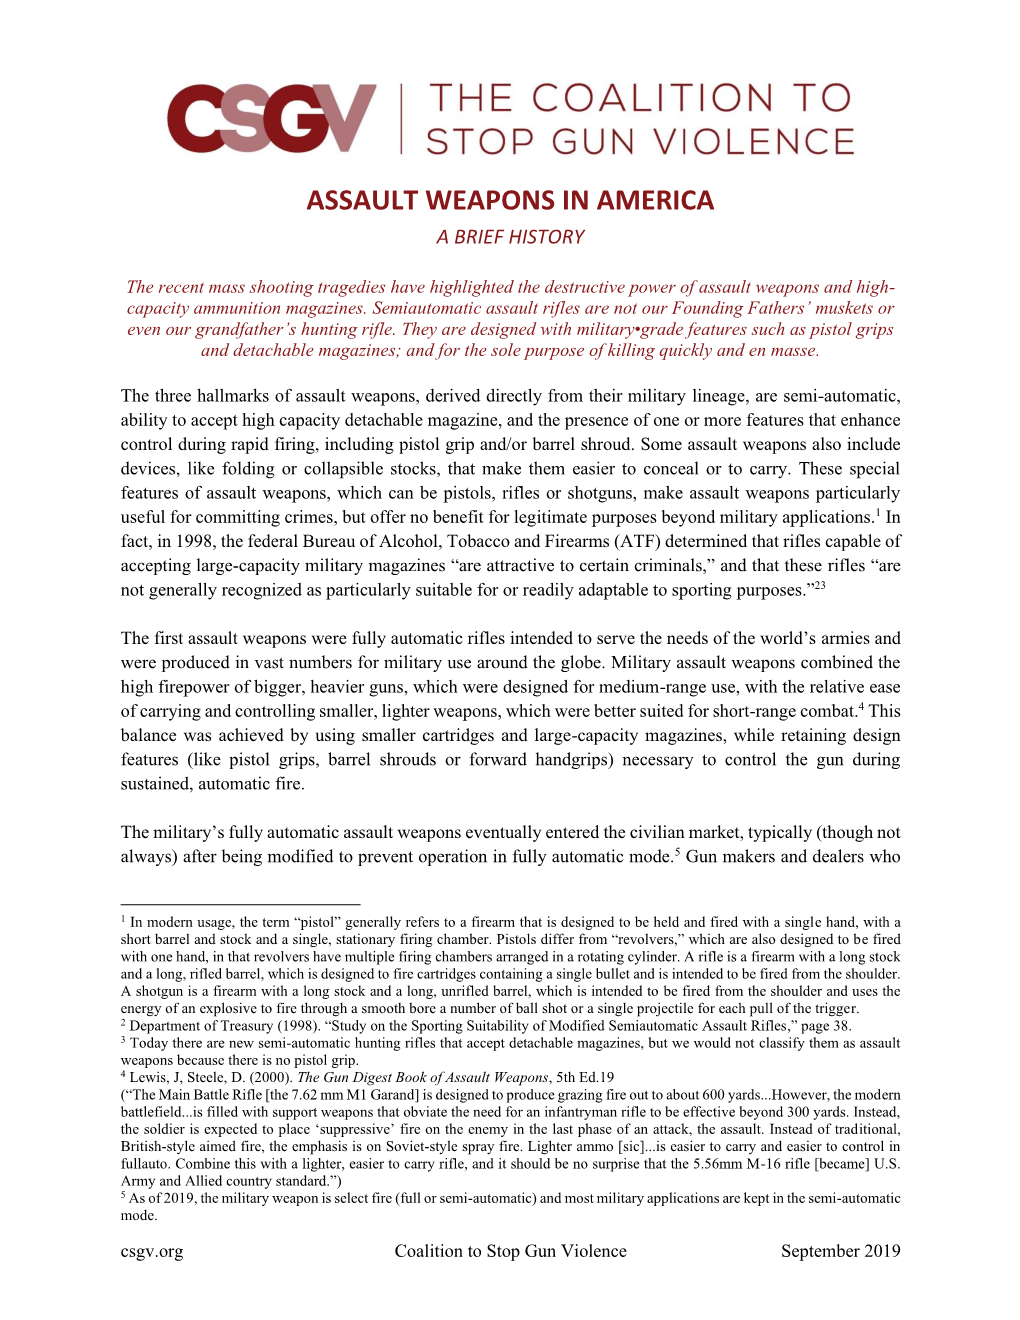 Assault Weapons in America a Brief History